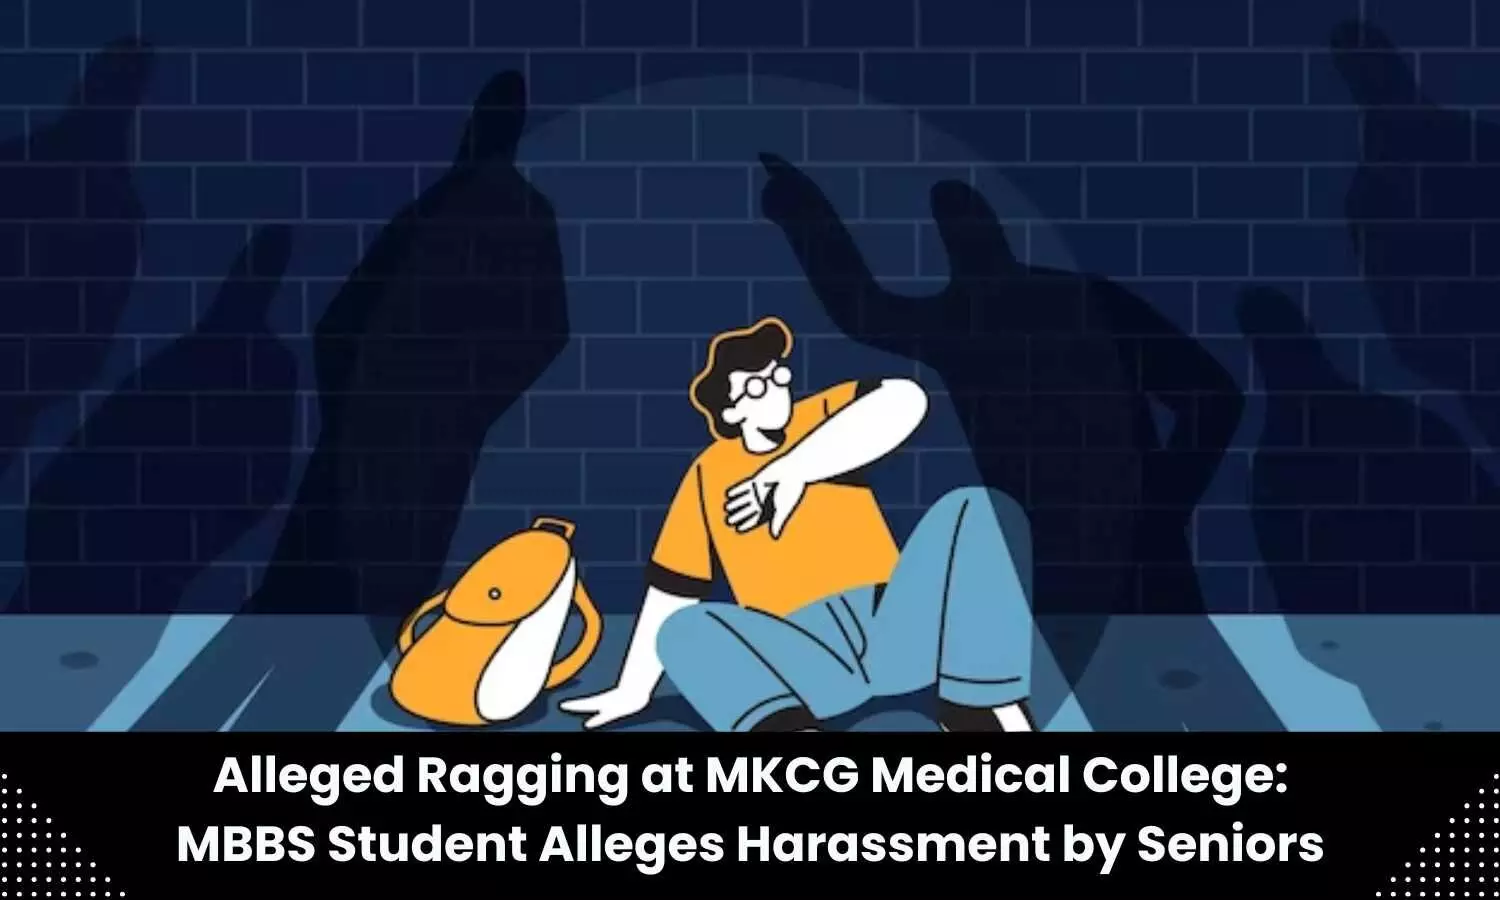 1 st year MBBS student accuses seniors of ragging at MKCG medical college